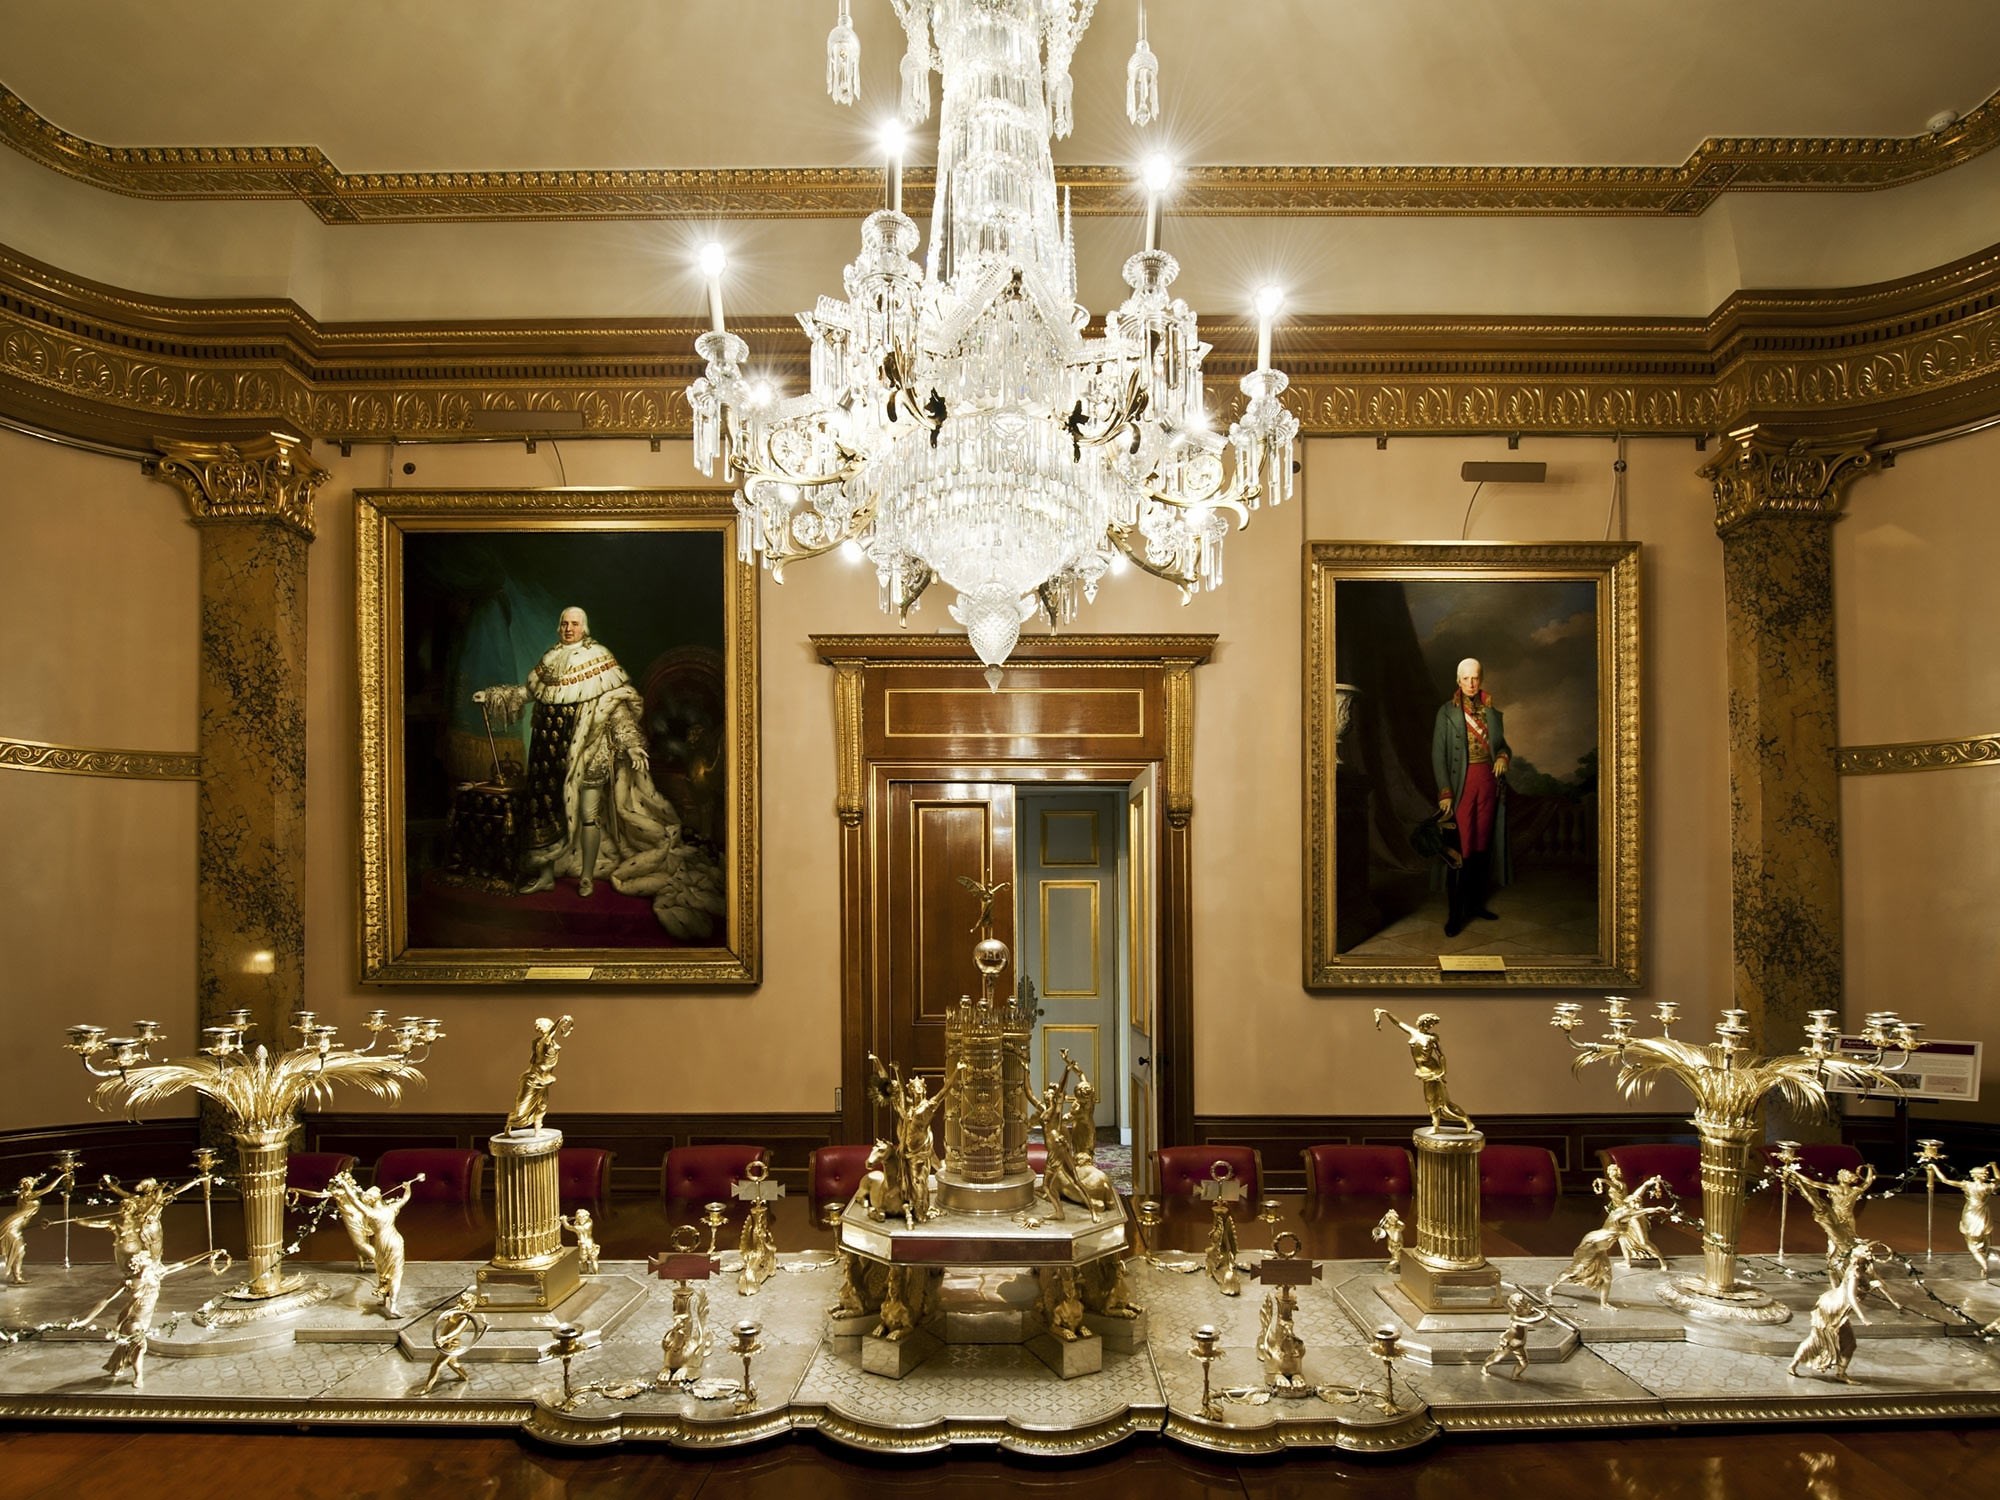 The State Dining Room, completed in about 1819. On display is the centrepiece of the Portuguese Service, presented to Wellington in 1816